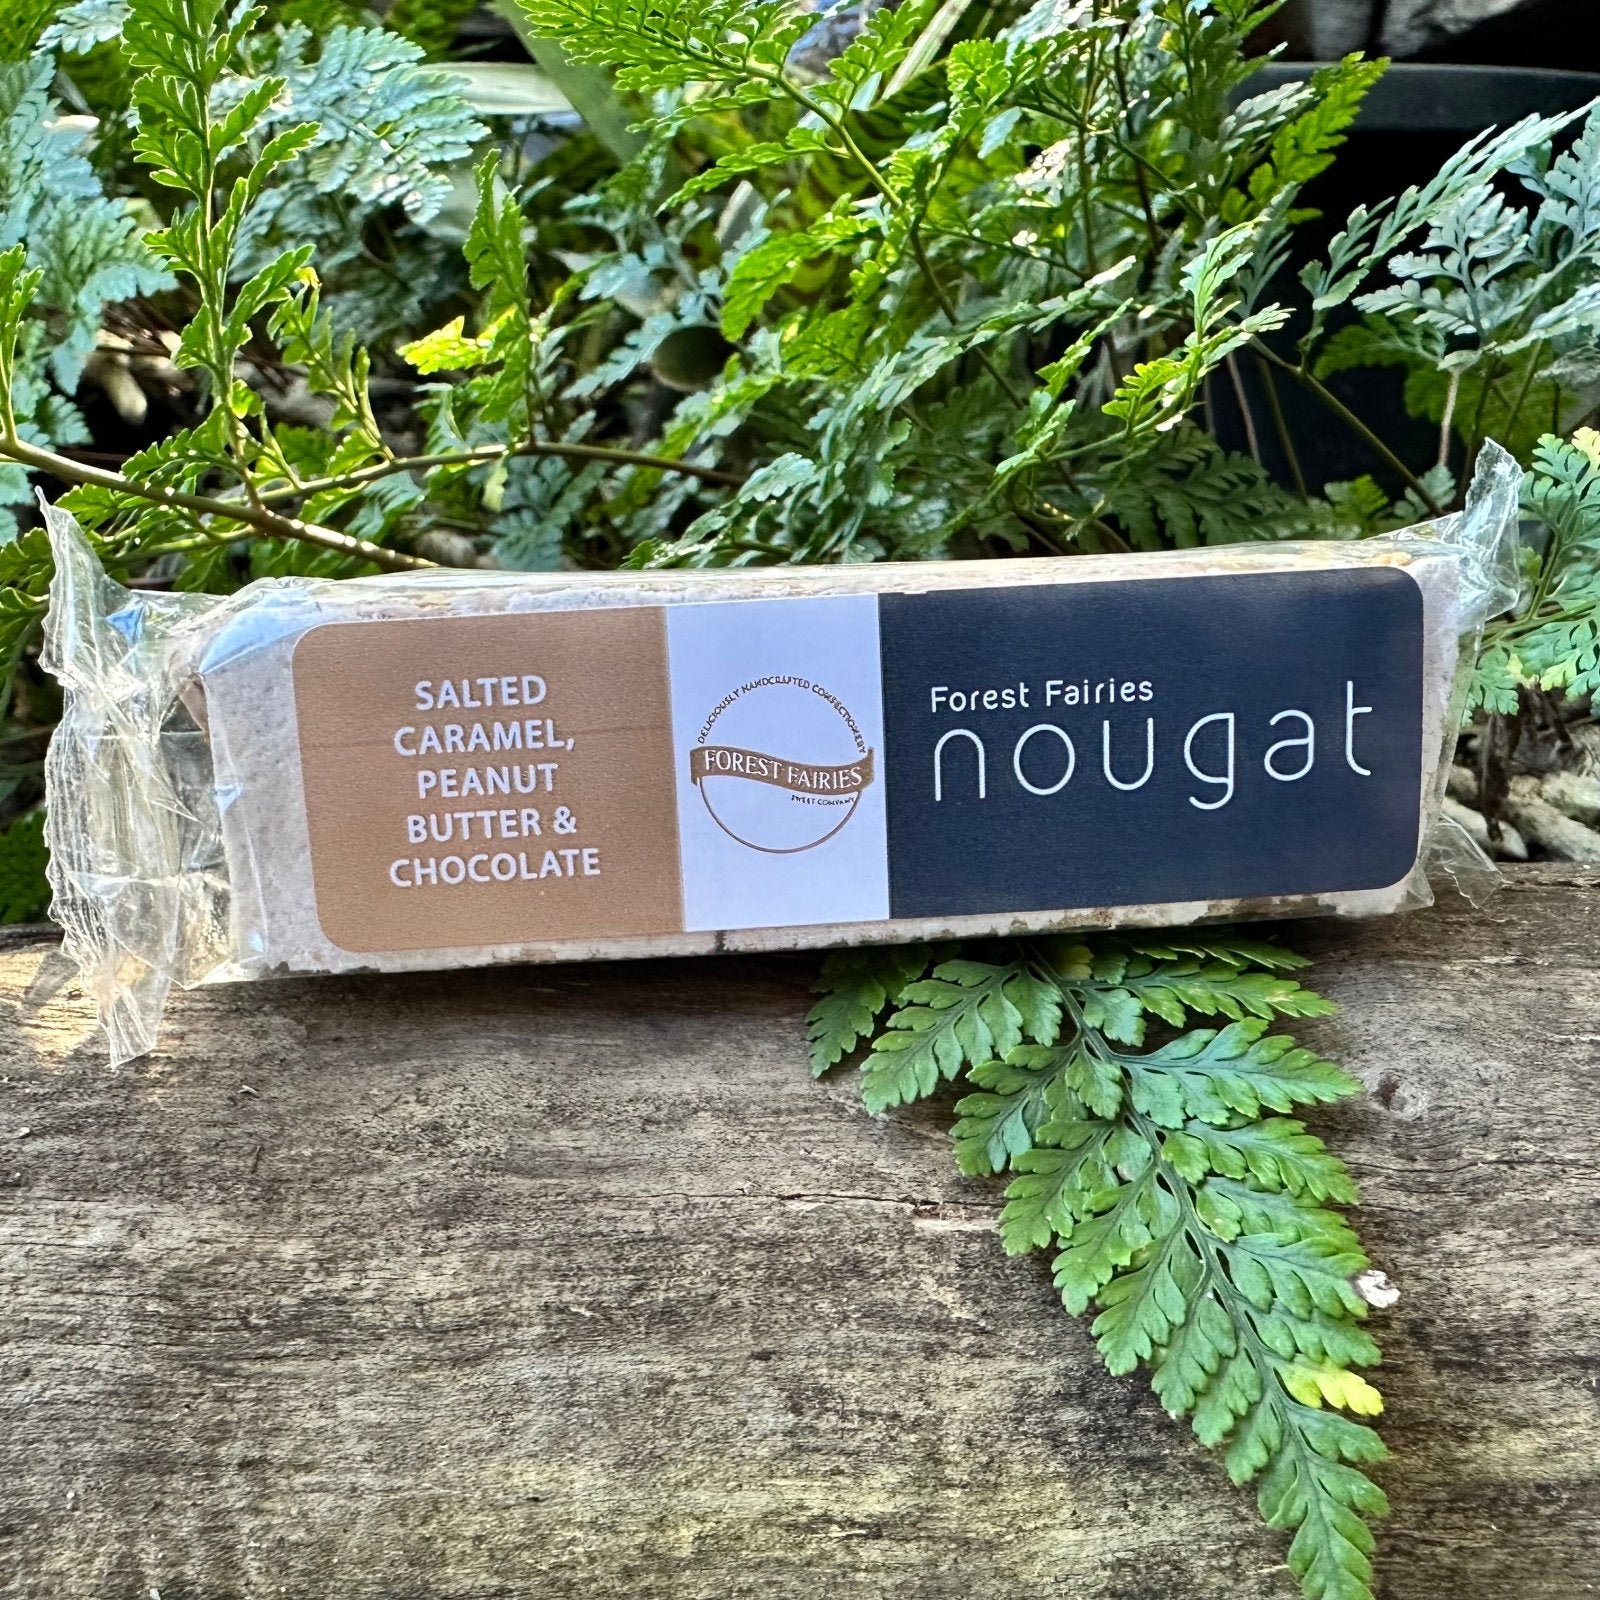 Forest Fairies Nougat - Salted Caramel, Peanut Butter & Chocolate (50g) - The Deli